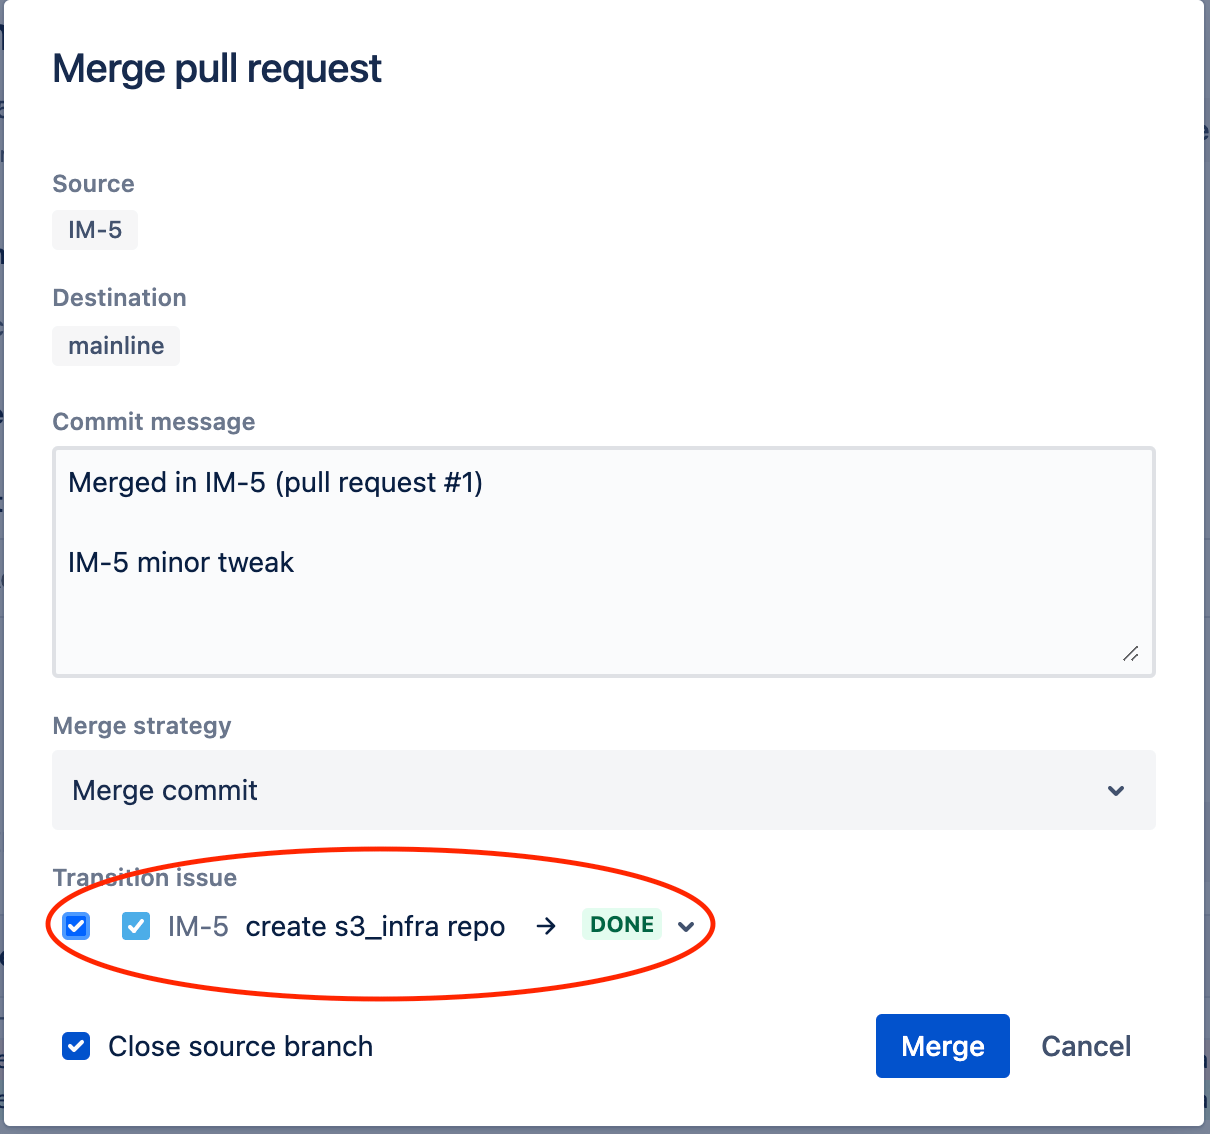 Check "transition issue" checkbox when merging pull request in Bitbucket